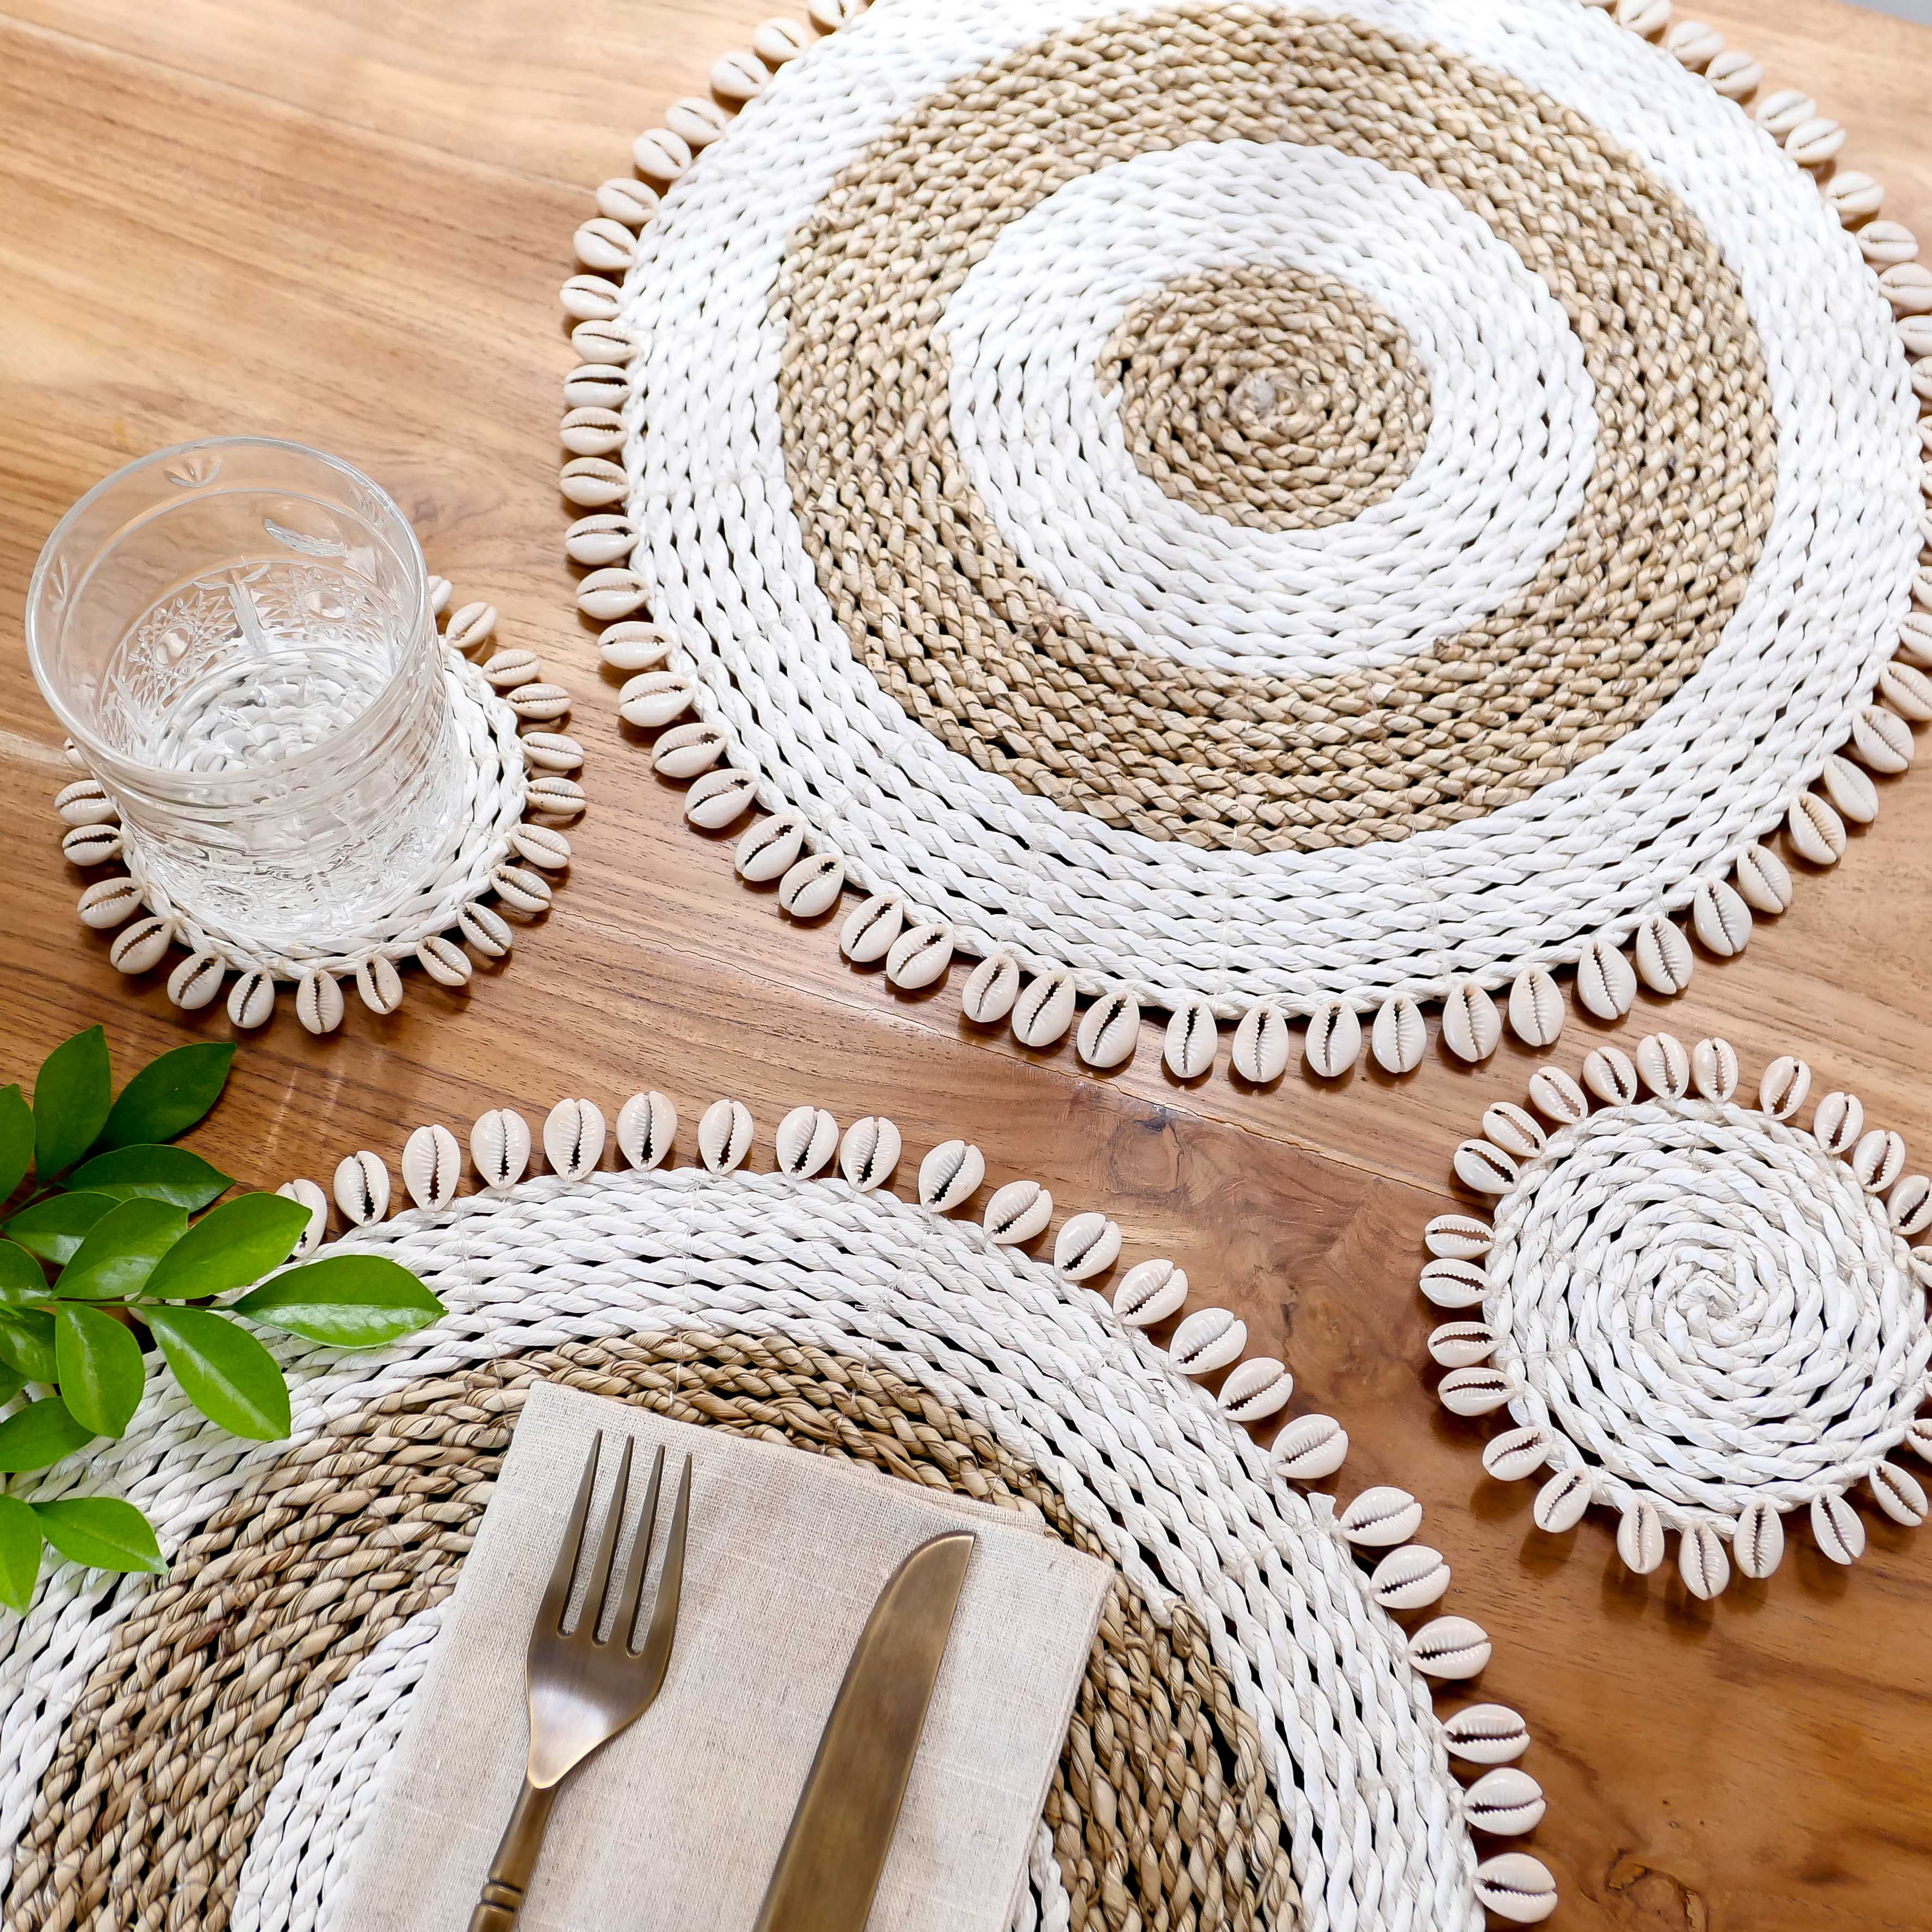 Seagrass placemat set with cowrie shell - white and natural beige